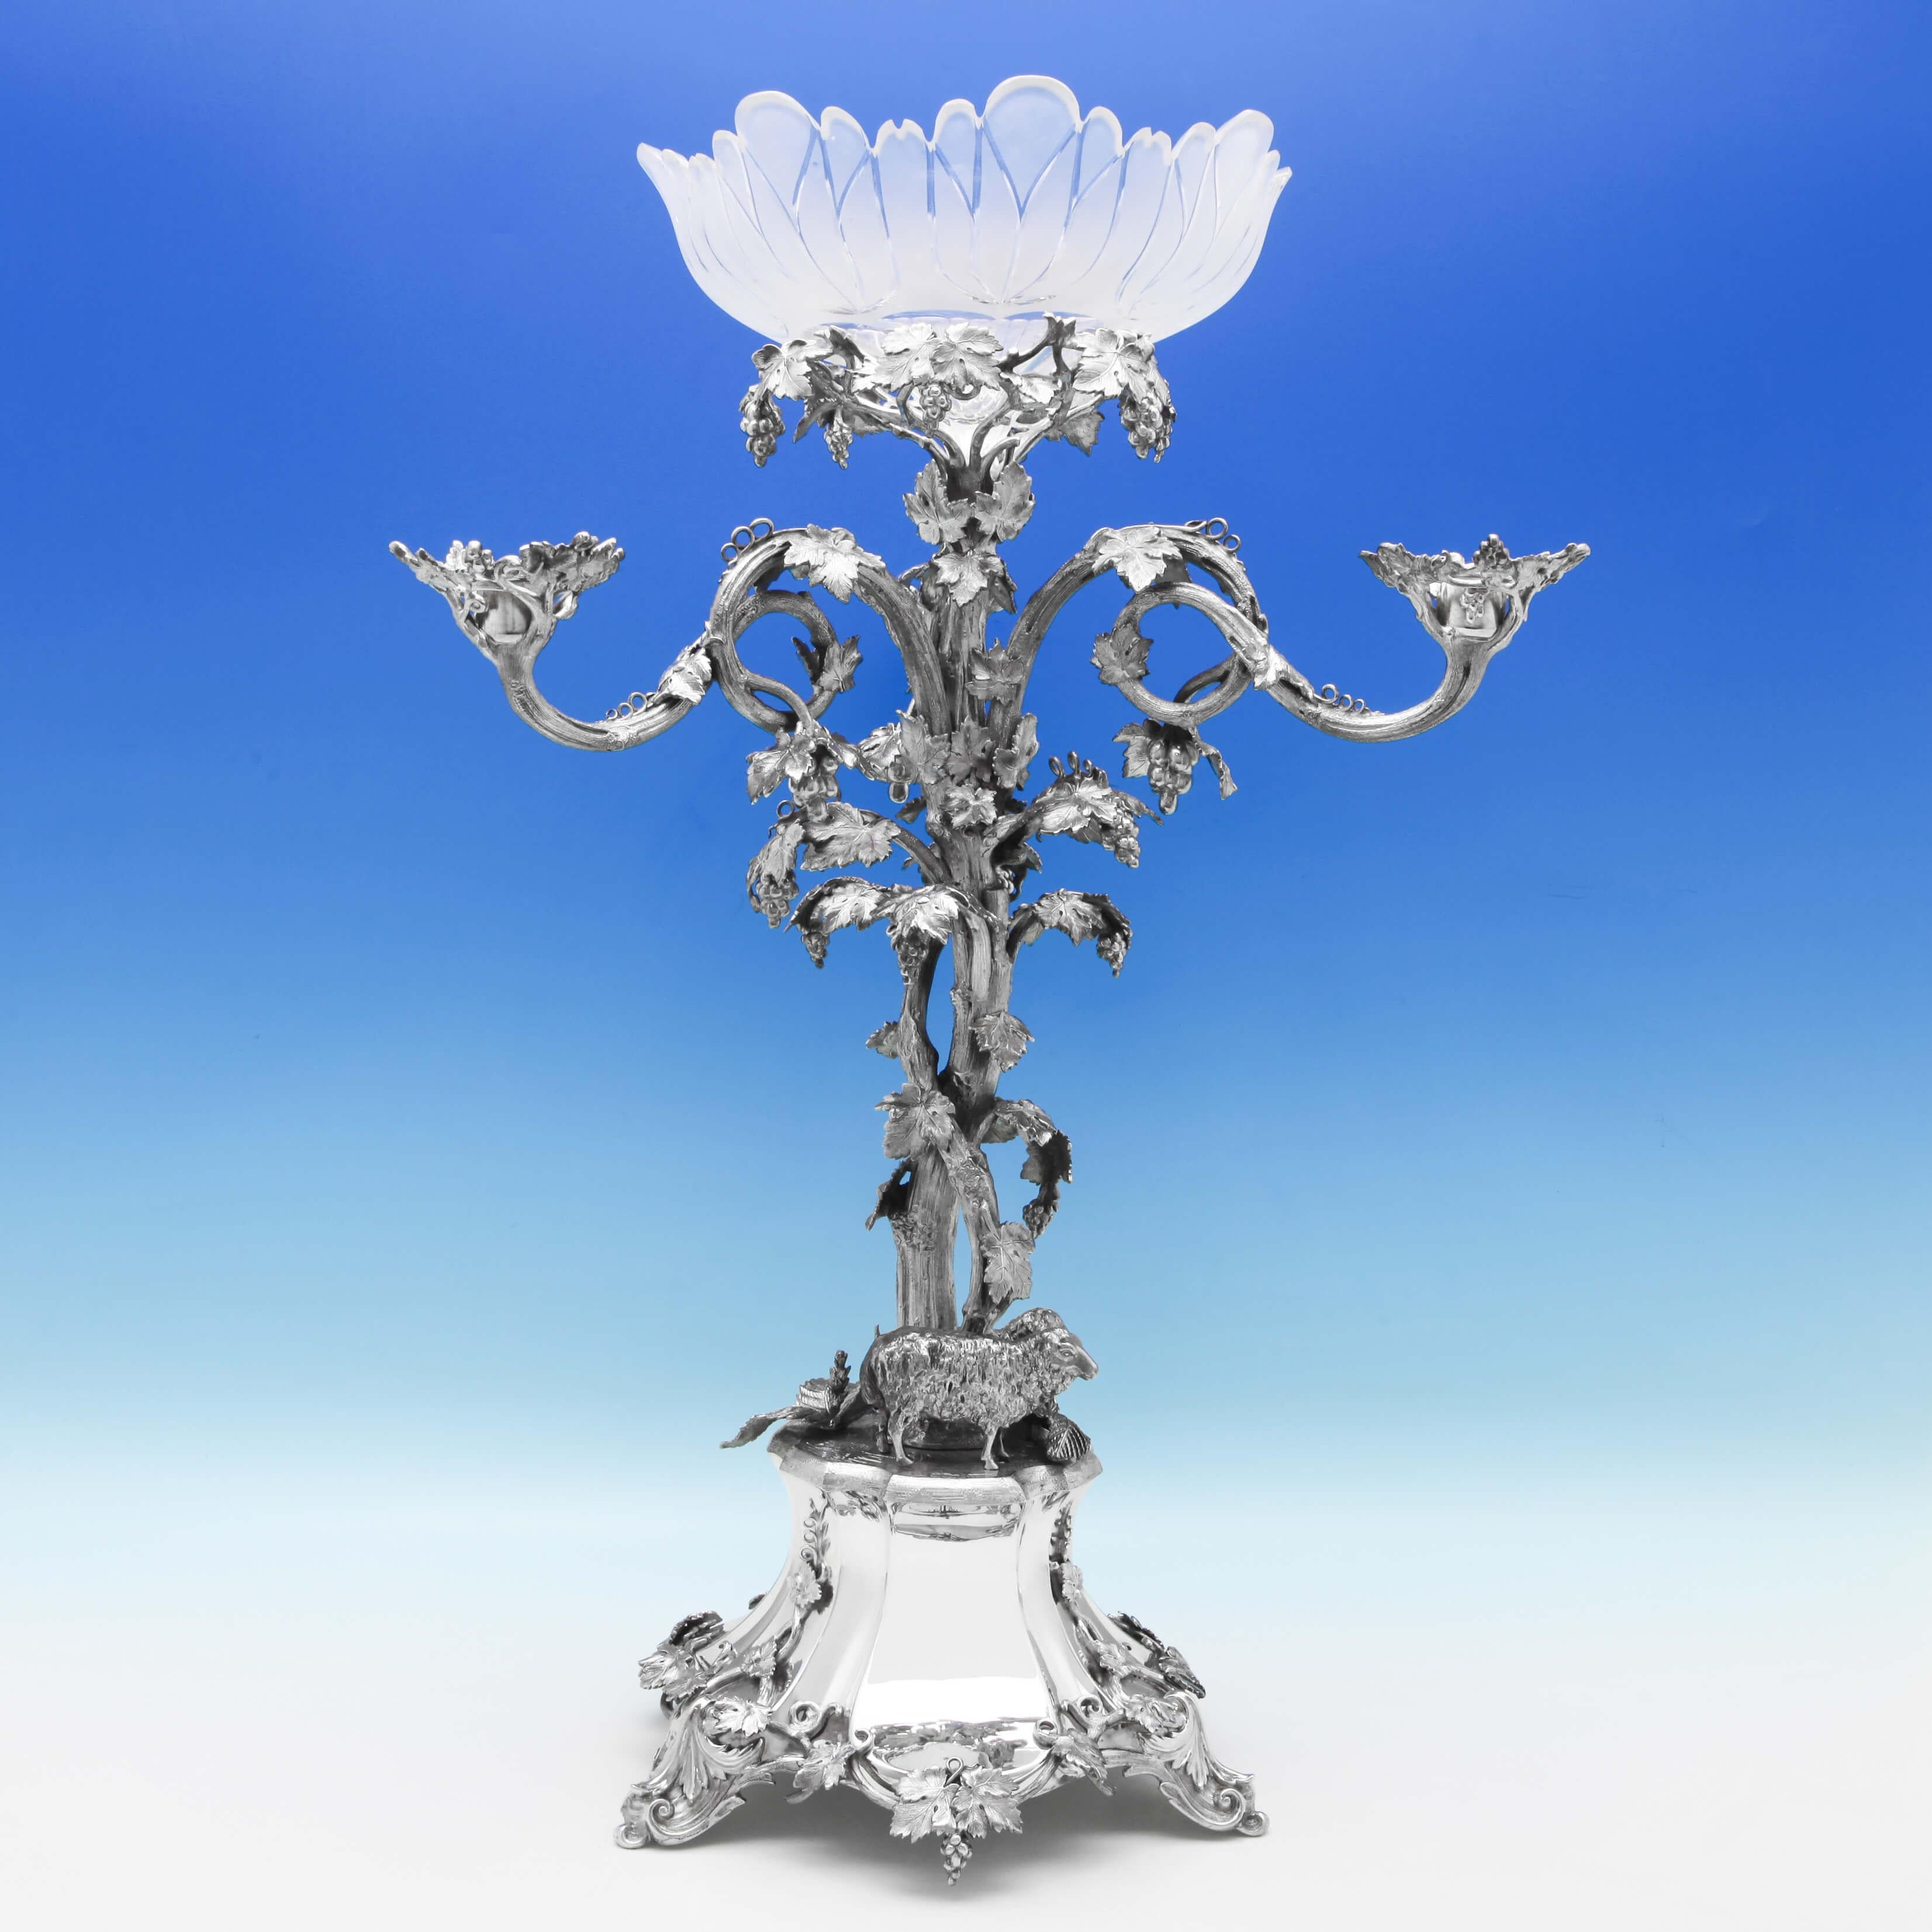 Made circa 1880, this attractive, Victorian, antique silver plated centrepiece, features a central glass bowl, and three smaller side bowls. The centrepiece is naturalistic in style, modelled as an intwined vine under which two sheep are shading